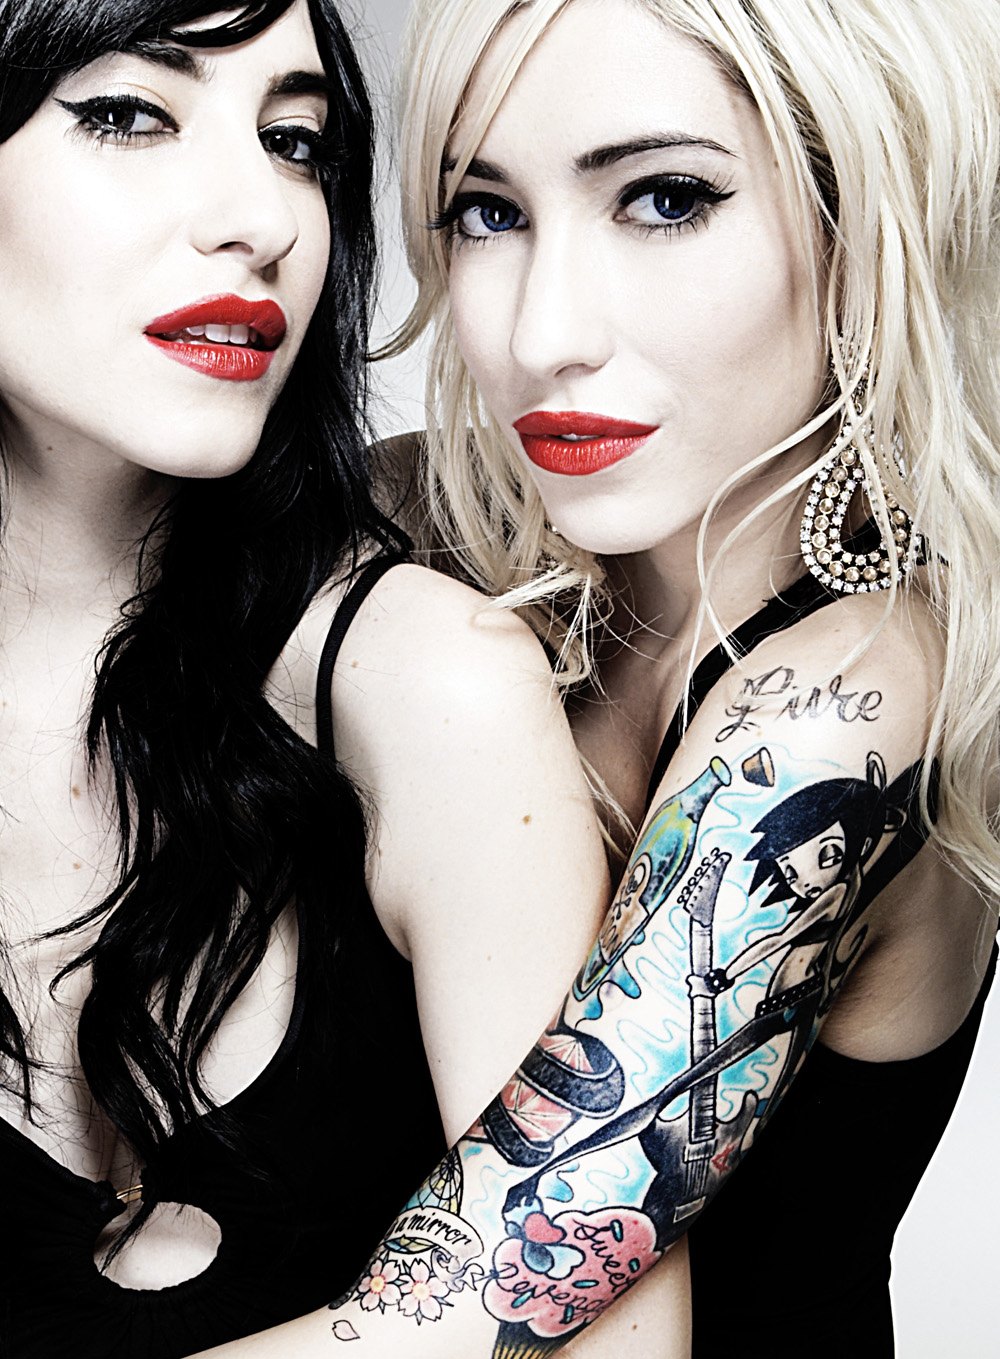 Is one of the veronicas bisexual